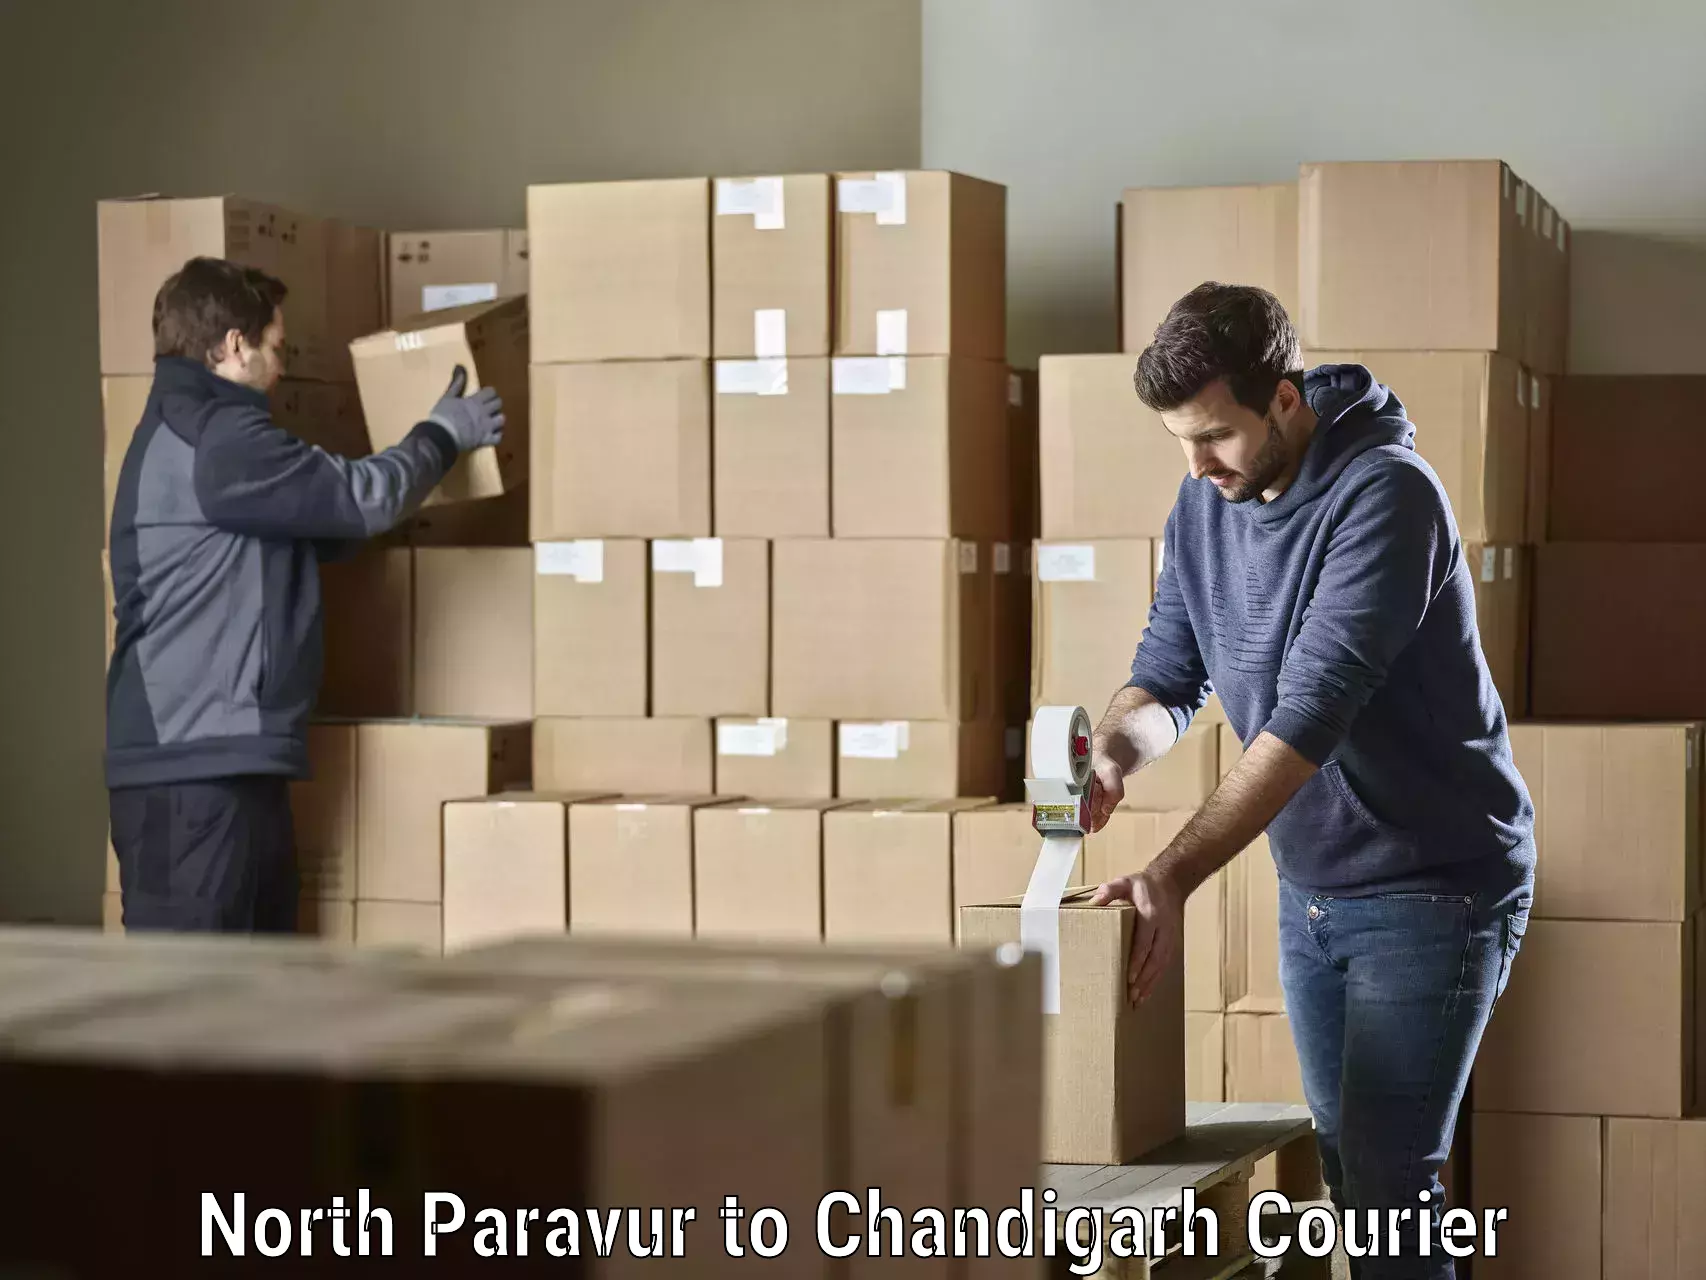 High-priority parcel service North Paravur to Chandigarh